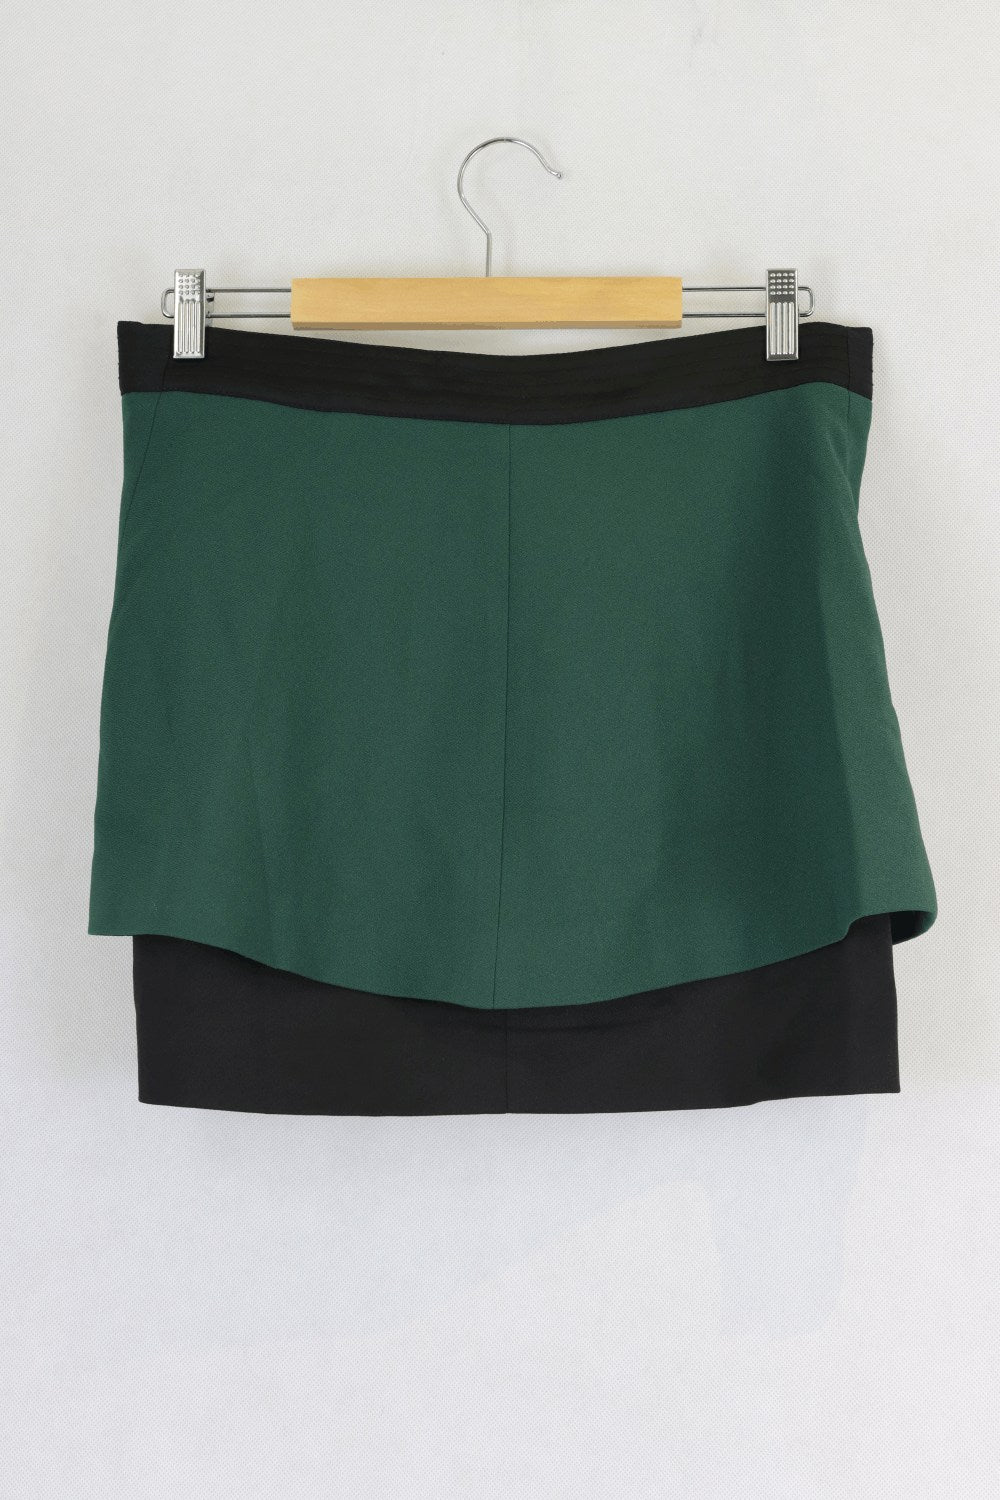 Finders Keepers Skirt Green And Black 8